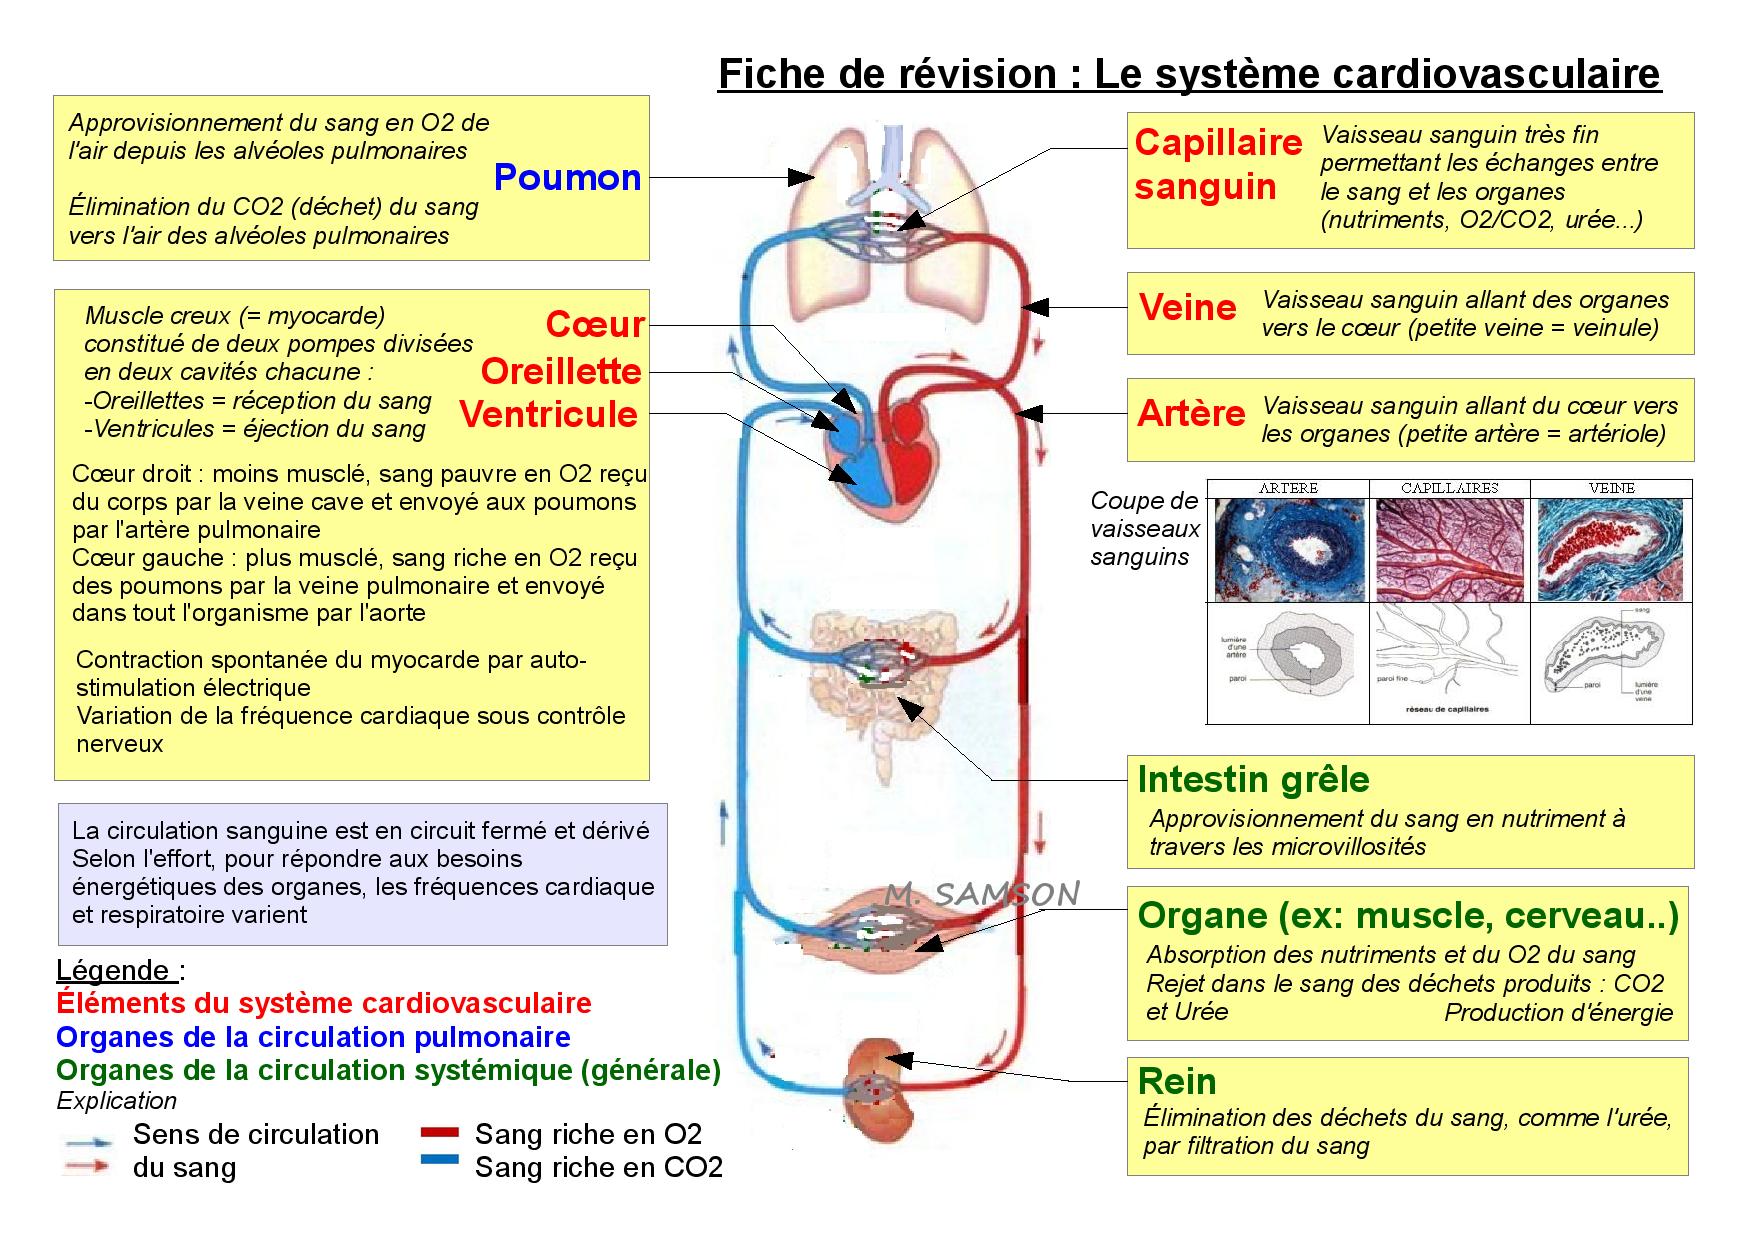 FICHES_REVISIONS_3eme_SAMSON_syst_cardiovascu-page-001.jpg